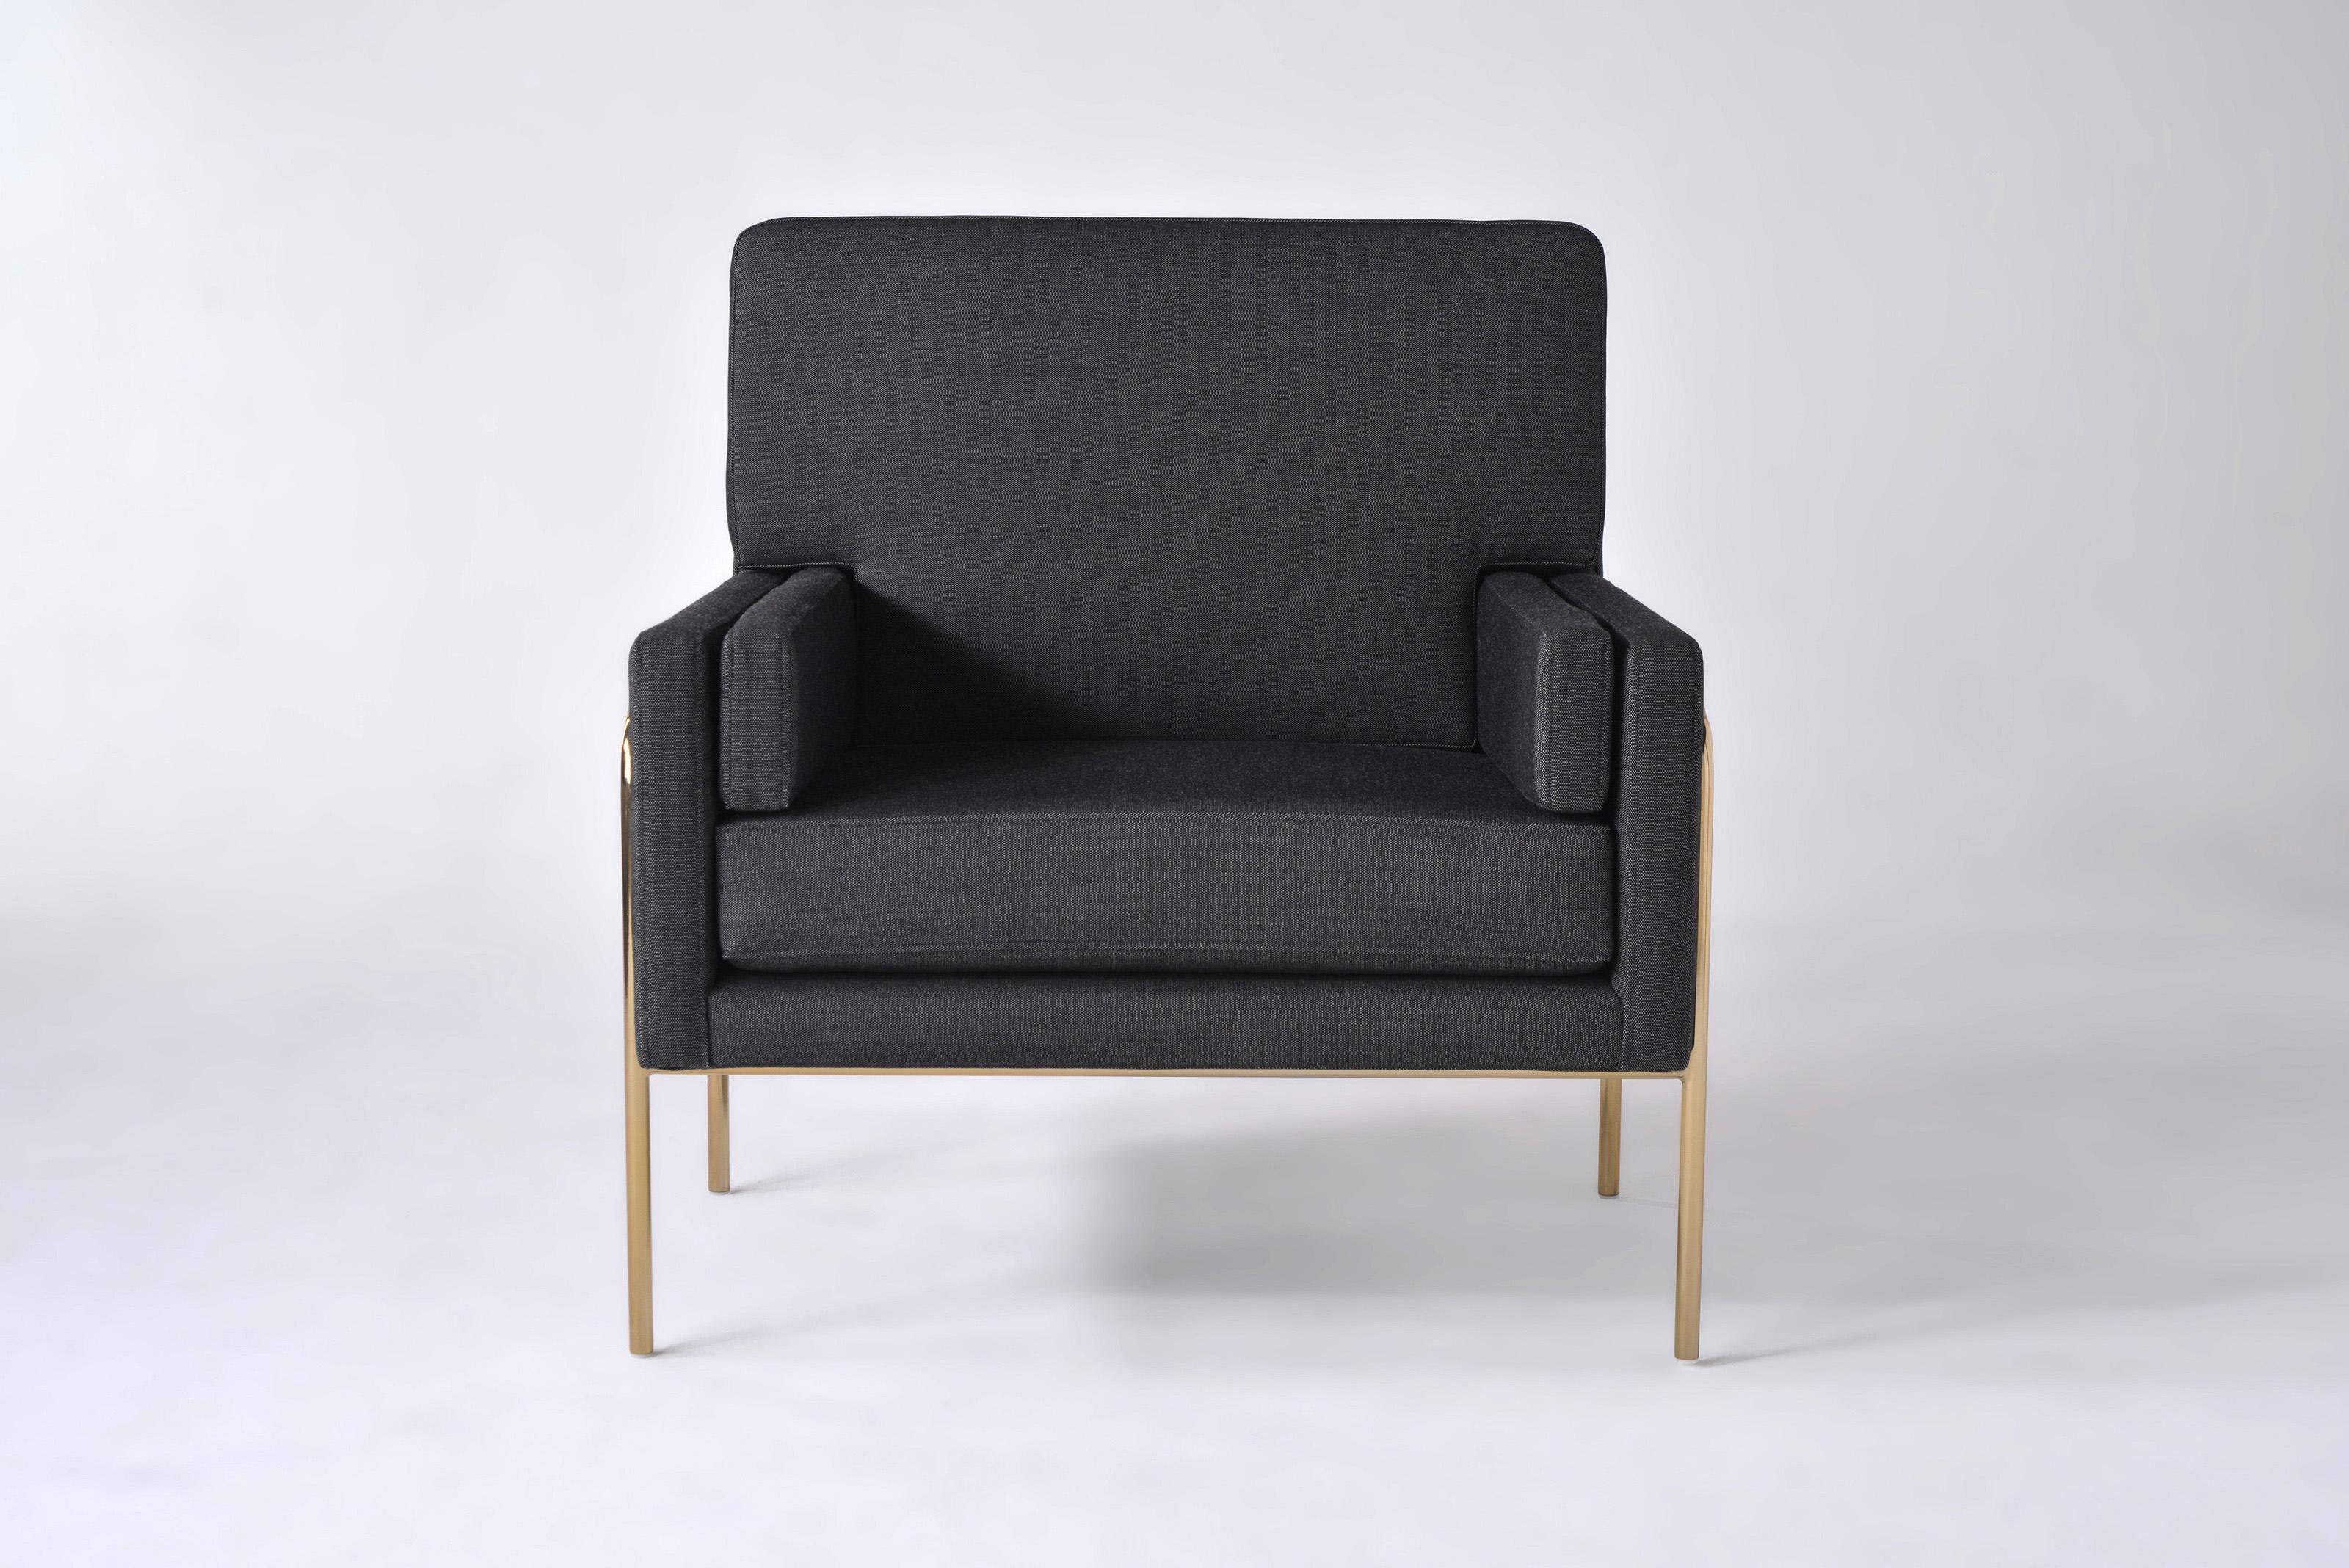 Trolley Low Back Lounge Chair by Phase Design
Dimensions: D 77.5 x W 80.6 x H 81.3 cm. 
Materials: Upholstery and smoked brass.

Solid steel bar available in a smoked brass, polished chrome, burnt copper, or powder coat finish with an upholstered